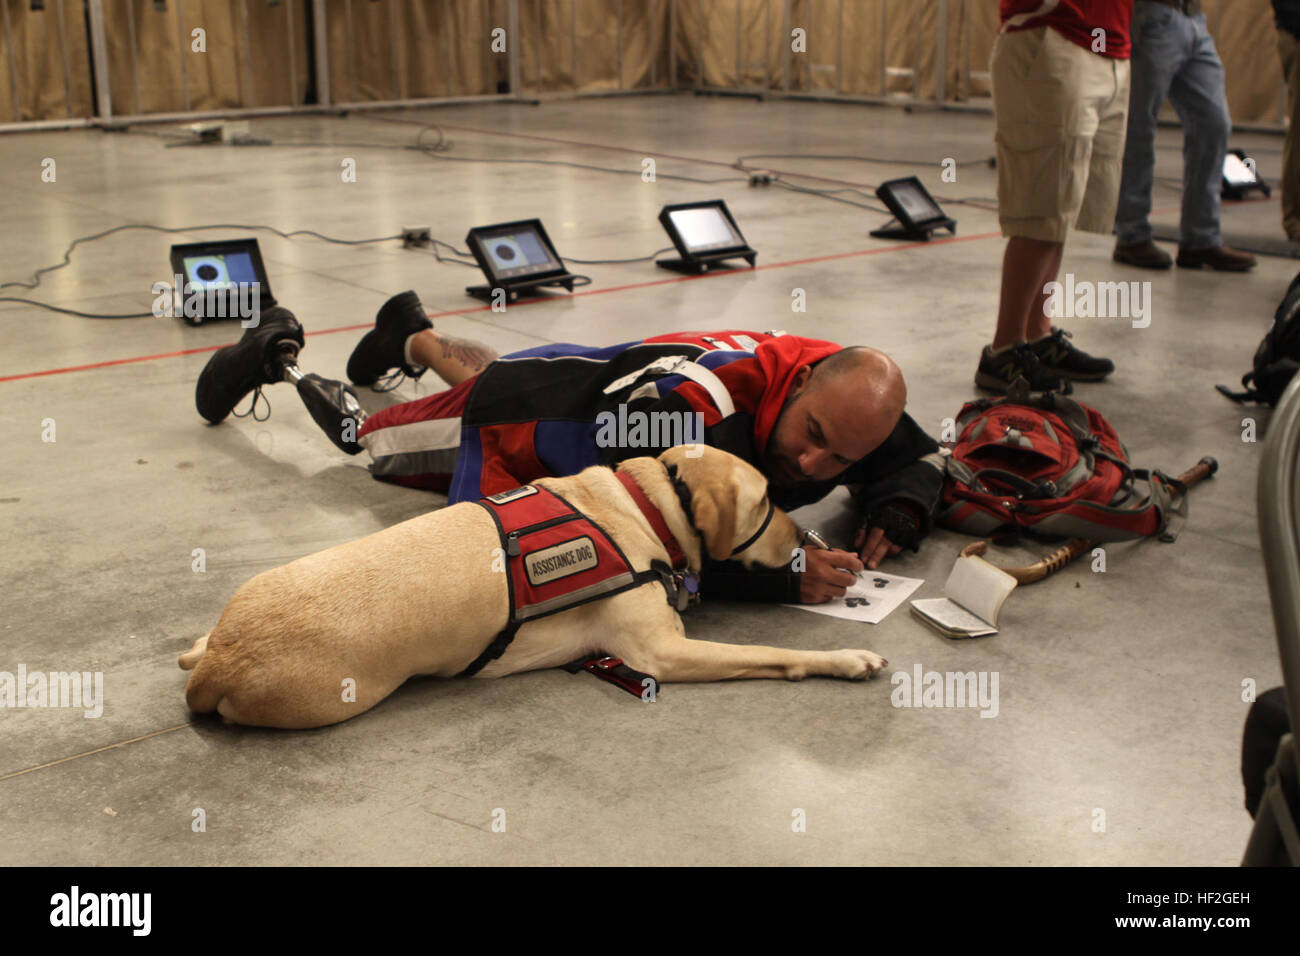 Sgt. Andres Burgos, a native of Orlando, Florida, gets some assistance analyzing his shots from his service dog, Gunny, during shooting practice for the Marine team, Sept. 21, in preparation for the 2014 Warrior Games. The Marine team has been training since Sept. 15 in order to build team cohesion and acclimate to the above 6,000 feet altitude of Colorado Springs. The Marine team is comprised of both active duty and veteran wounded, ill and injured Marines who are attached to or supported by the Wounded Warrior Regiment, the official unit of the Marine Corps charged with providing comprehensi Stock Photo